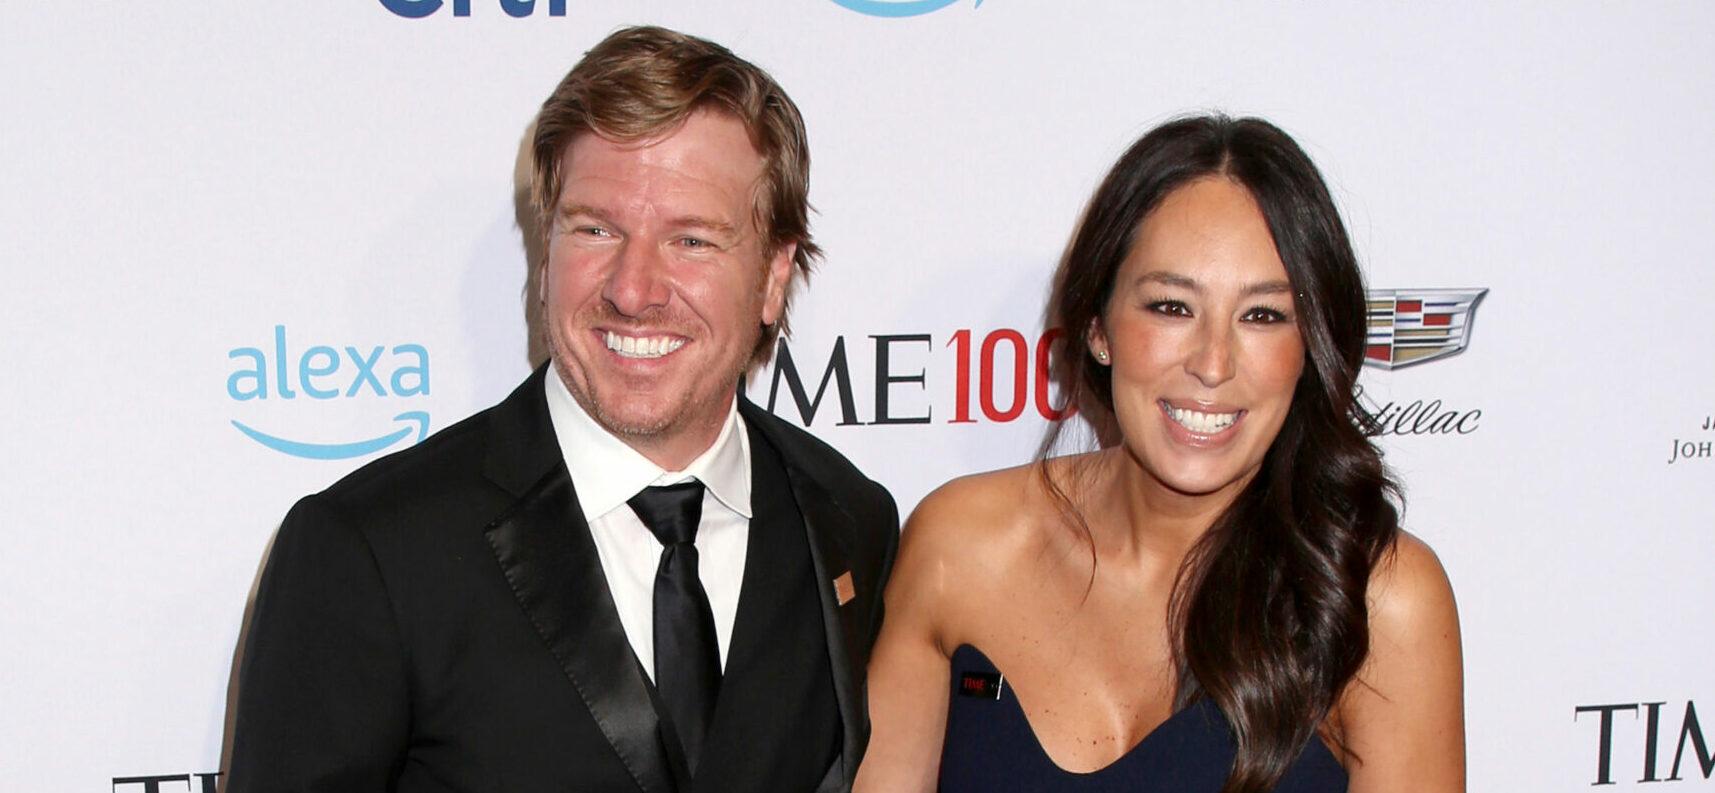 Joanna Gaines & Chip Gaines smiling